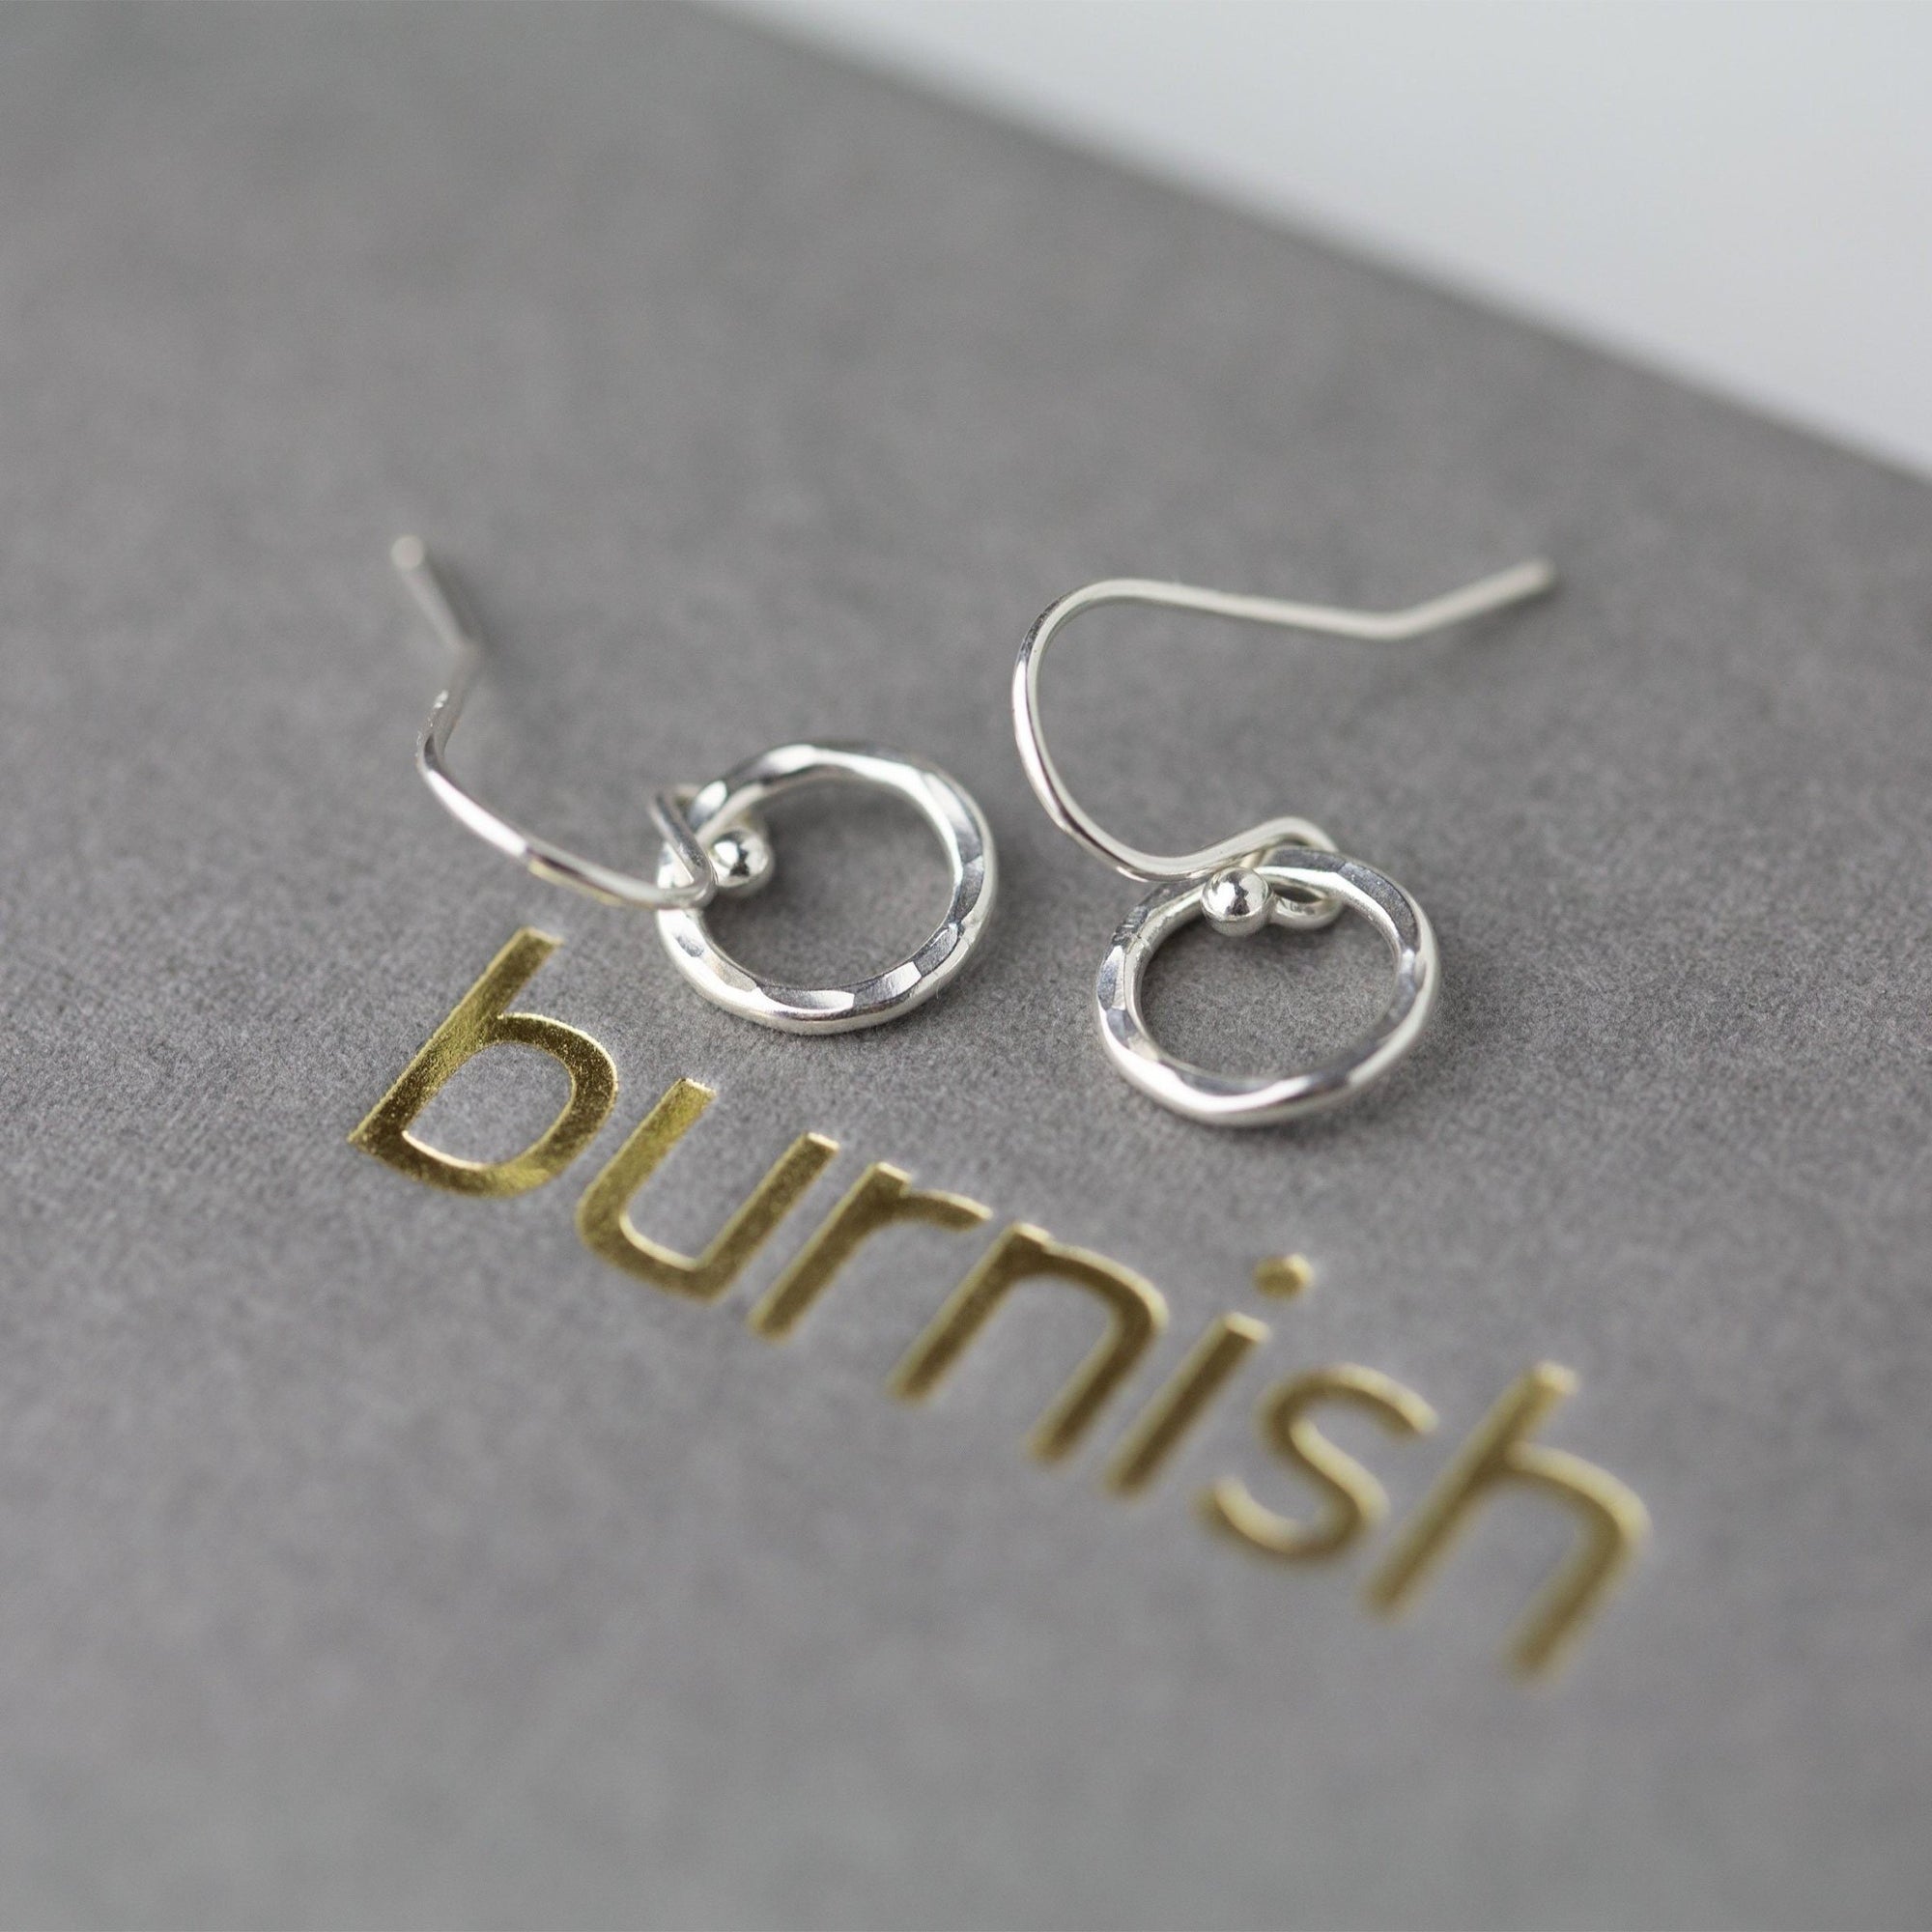 Small Hammered Circle Earrings - Handmade Jewelry by Burnish